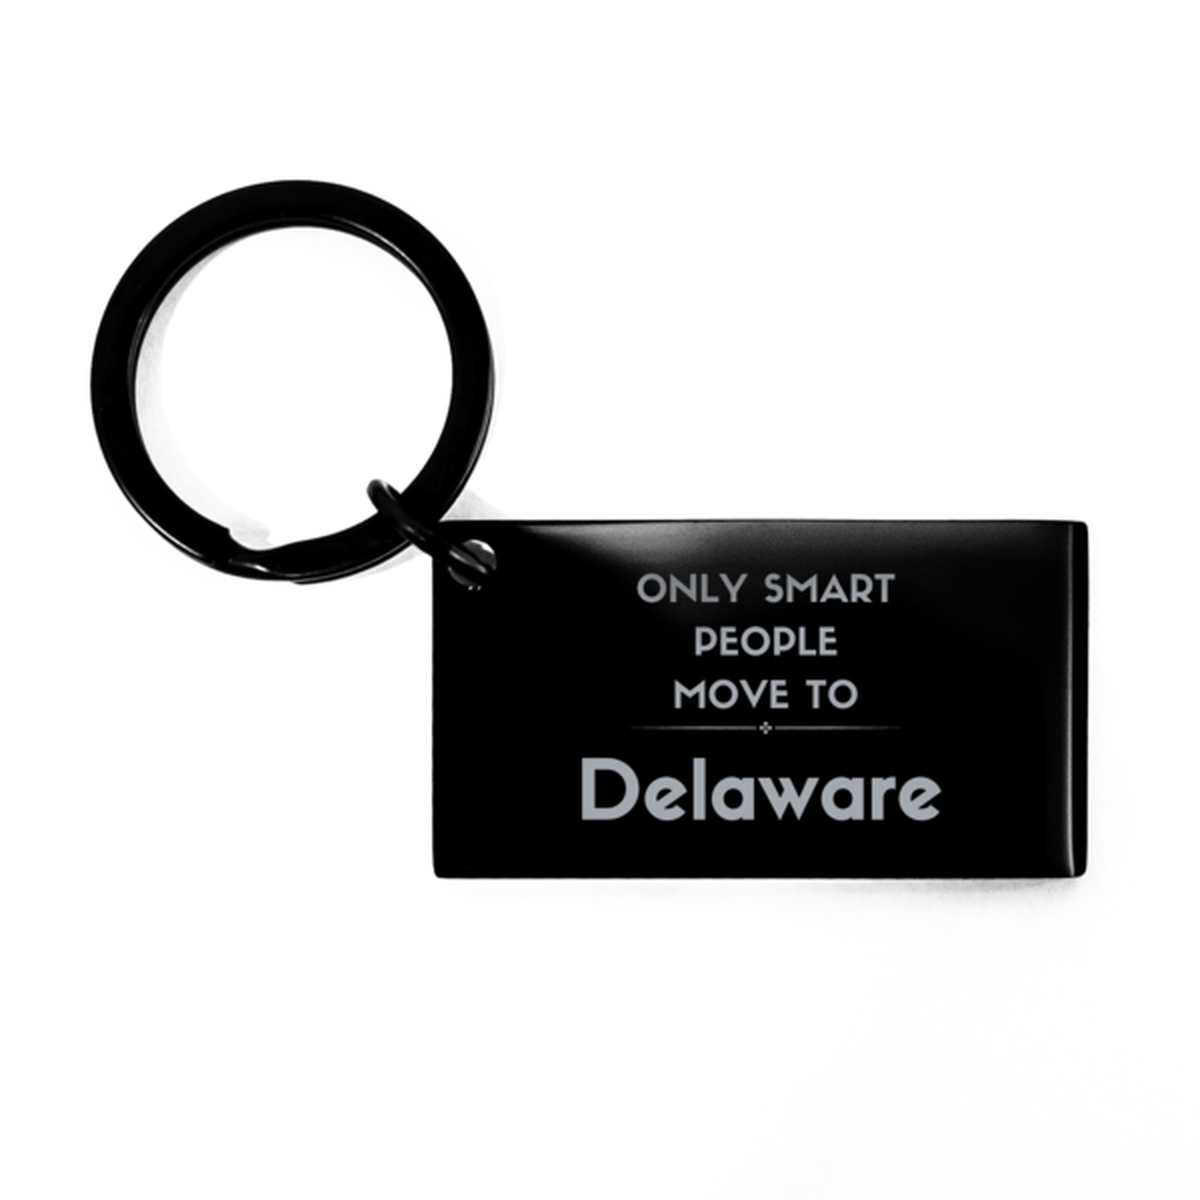 Only smart people move to Delaware Keychain, Gag Gifts For Delaware, Move to Delaware Gifts for Friends Coworker Funny Saying Quote